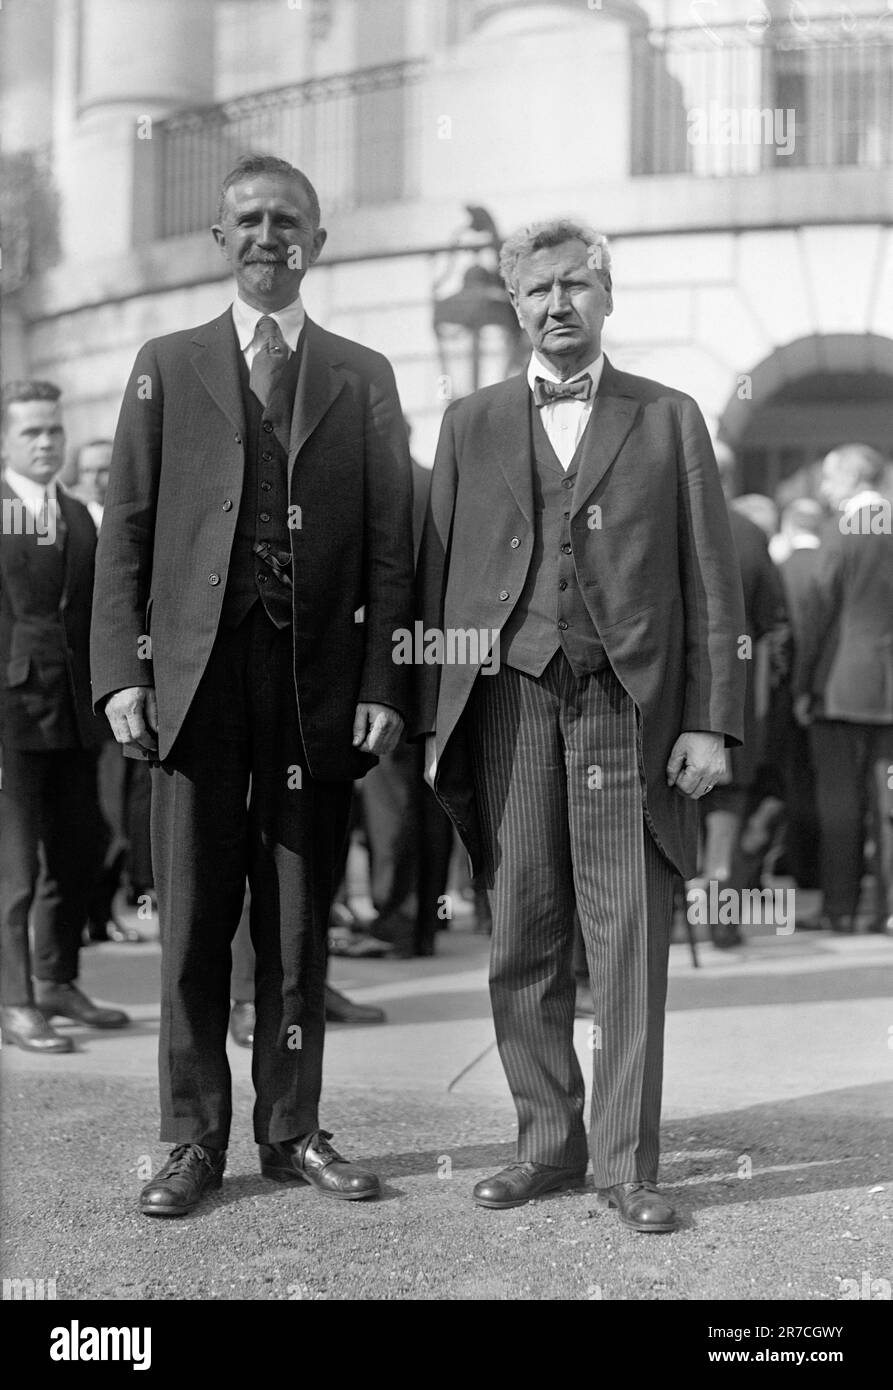 Washington, D.C.:  1919 President Wilson's Secretary of Labor William B. Wilson, (r) and business leader and theorist Roger W. Babson. Stock Photo